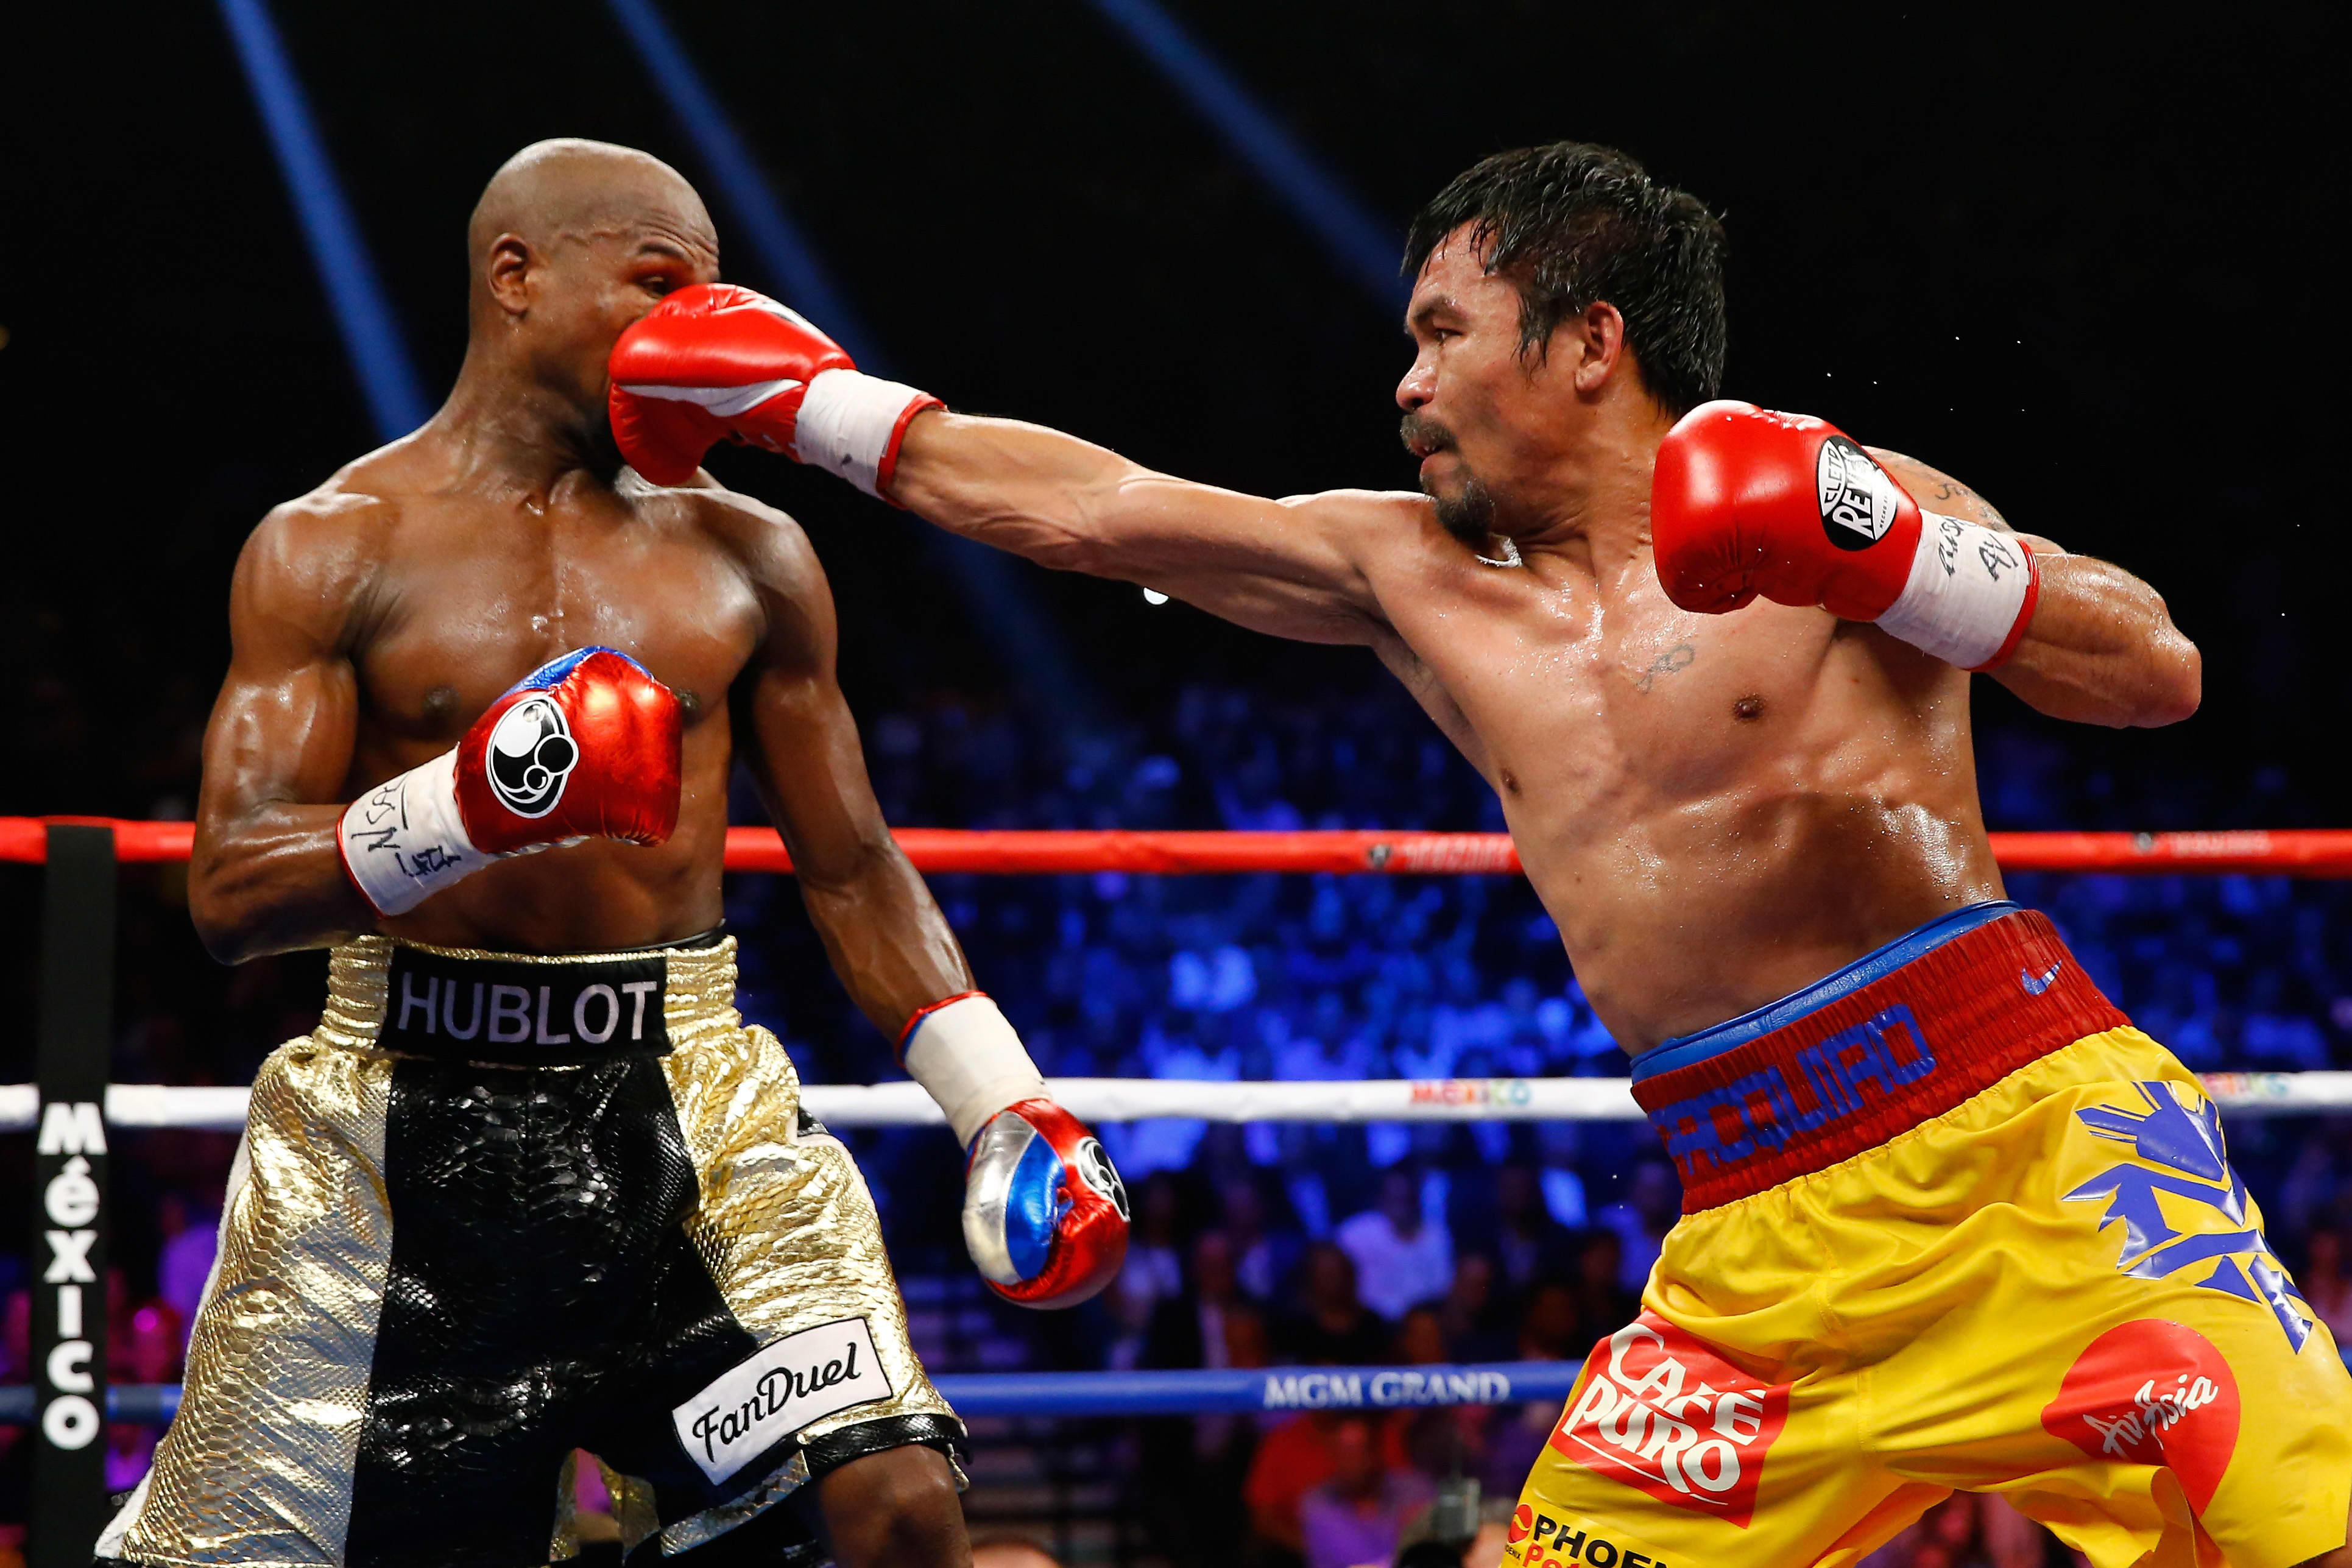 Twitter took down 30 Periscope streams of Mayweather-Pacquiao fight